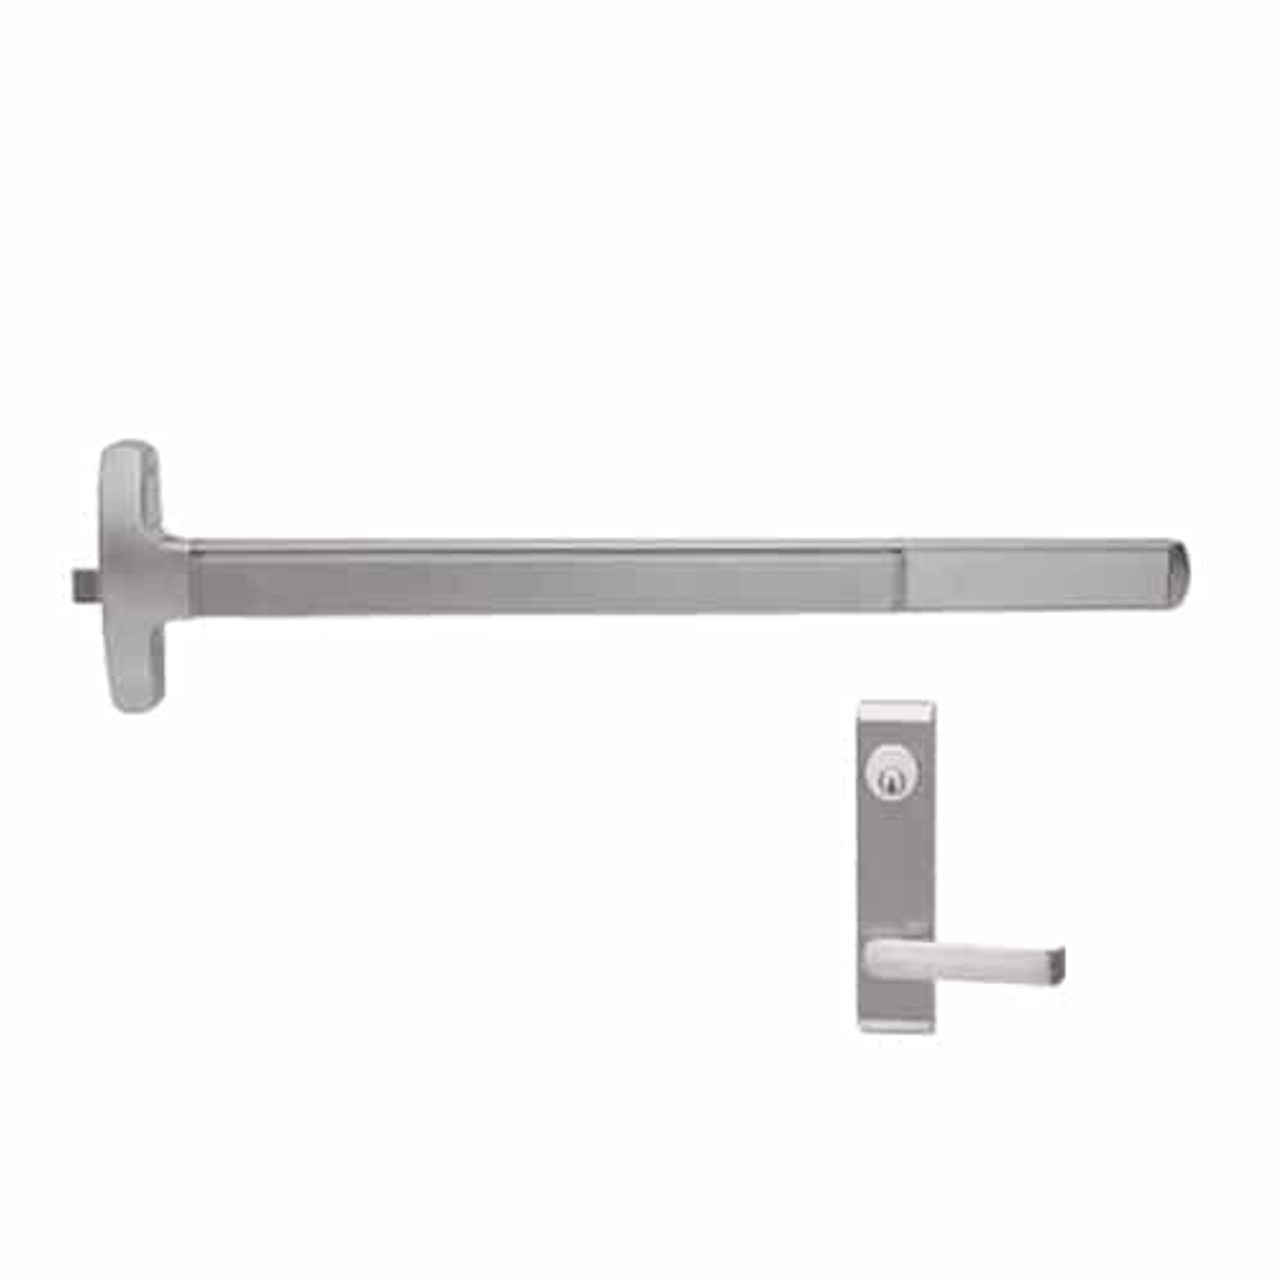 F-24-R-L-DANE-US32D-4-RHR Falcon Exit Device in Satin Stainless Steel